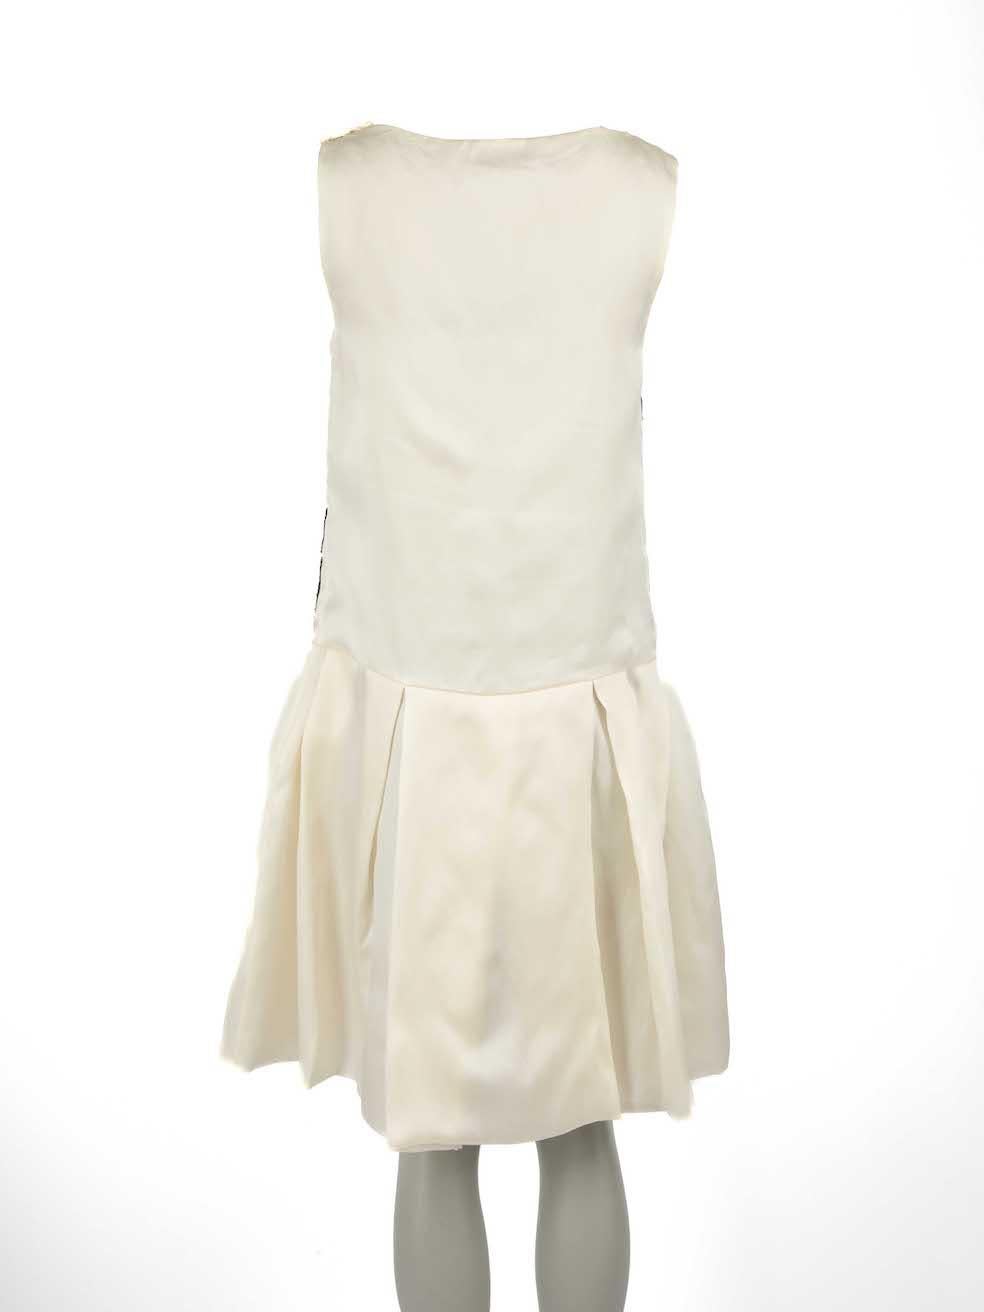 Dior Ecru Embellished Drop Waist Dress Size M In Excellent Condition For Sale In London, GB